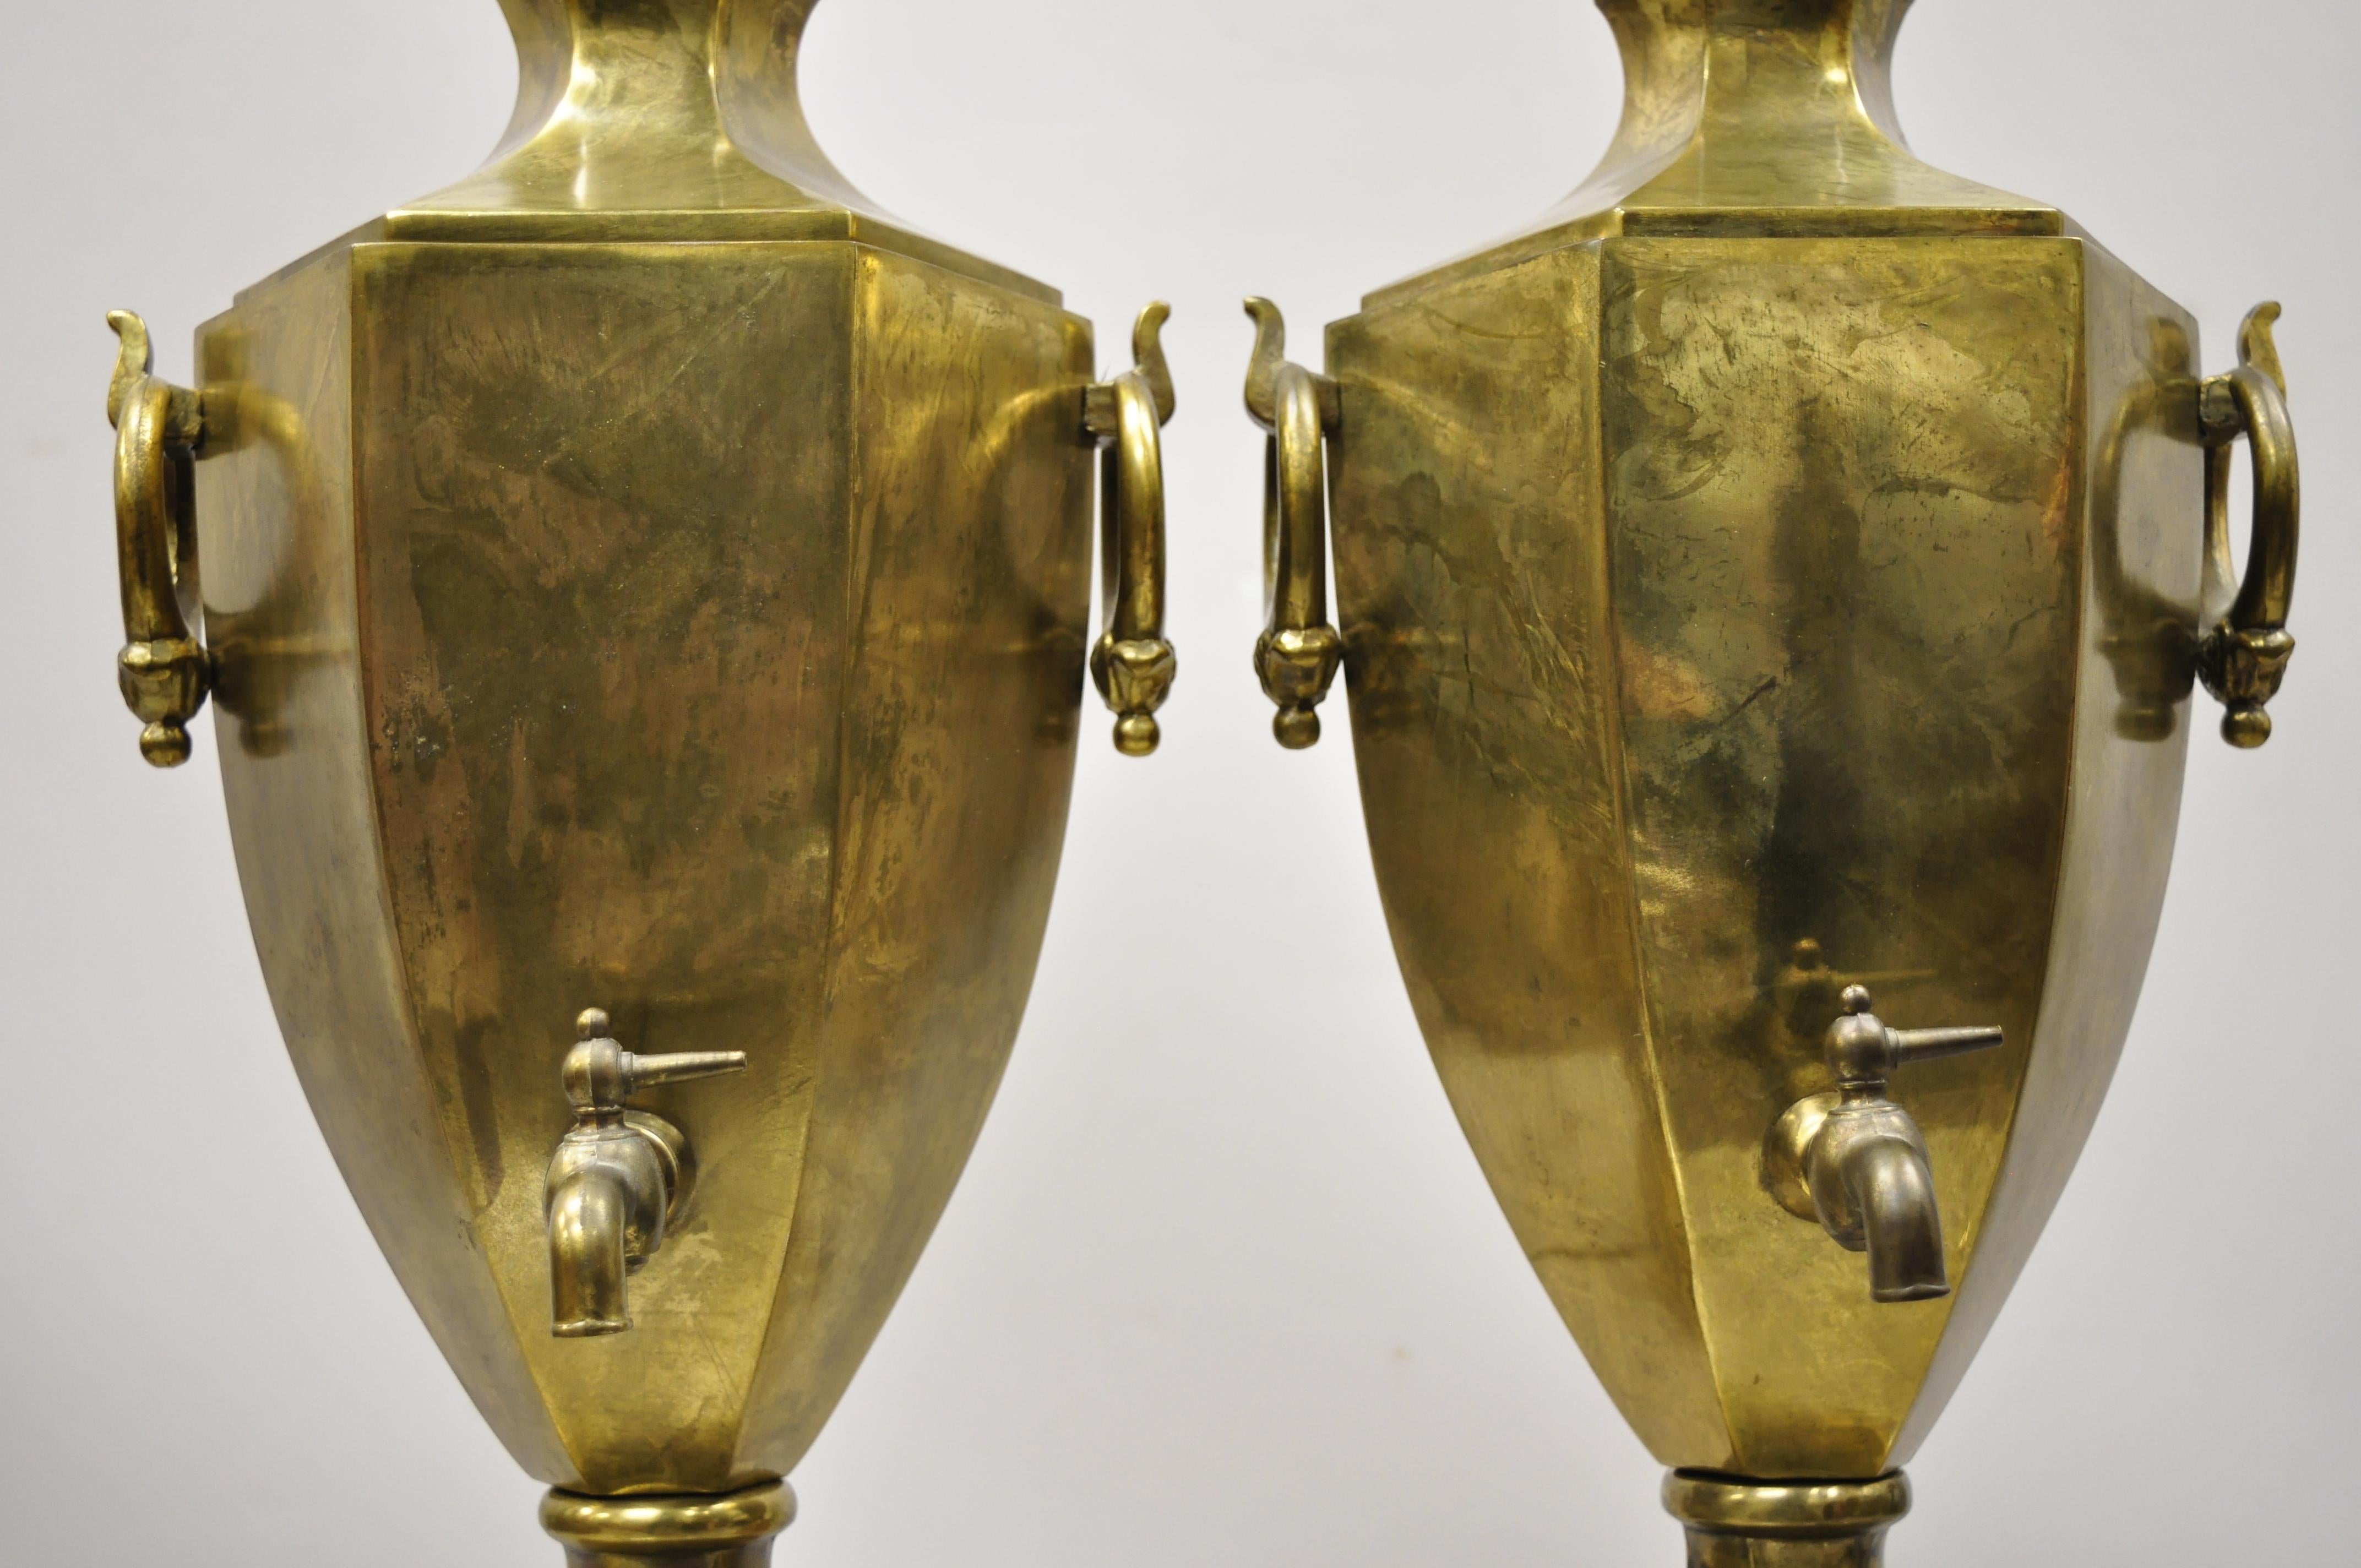 Regency Paul Hanson Burnished Brass Samovar Urn Form Table Lamps with Shades - a Pair For Sale